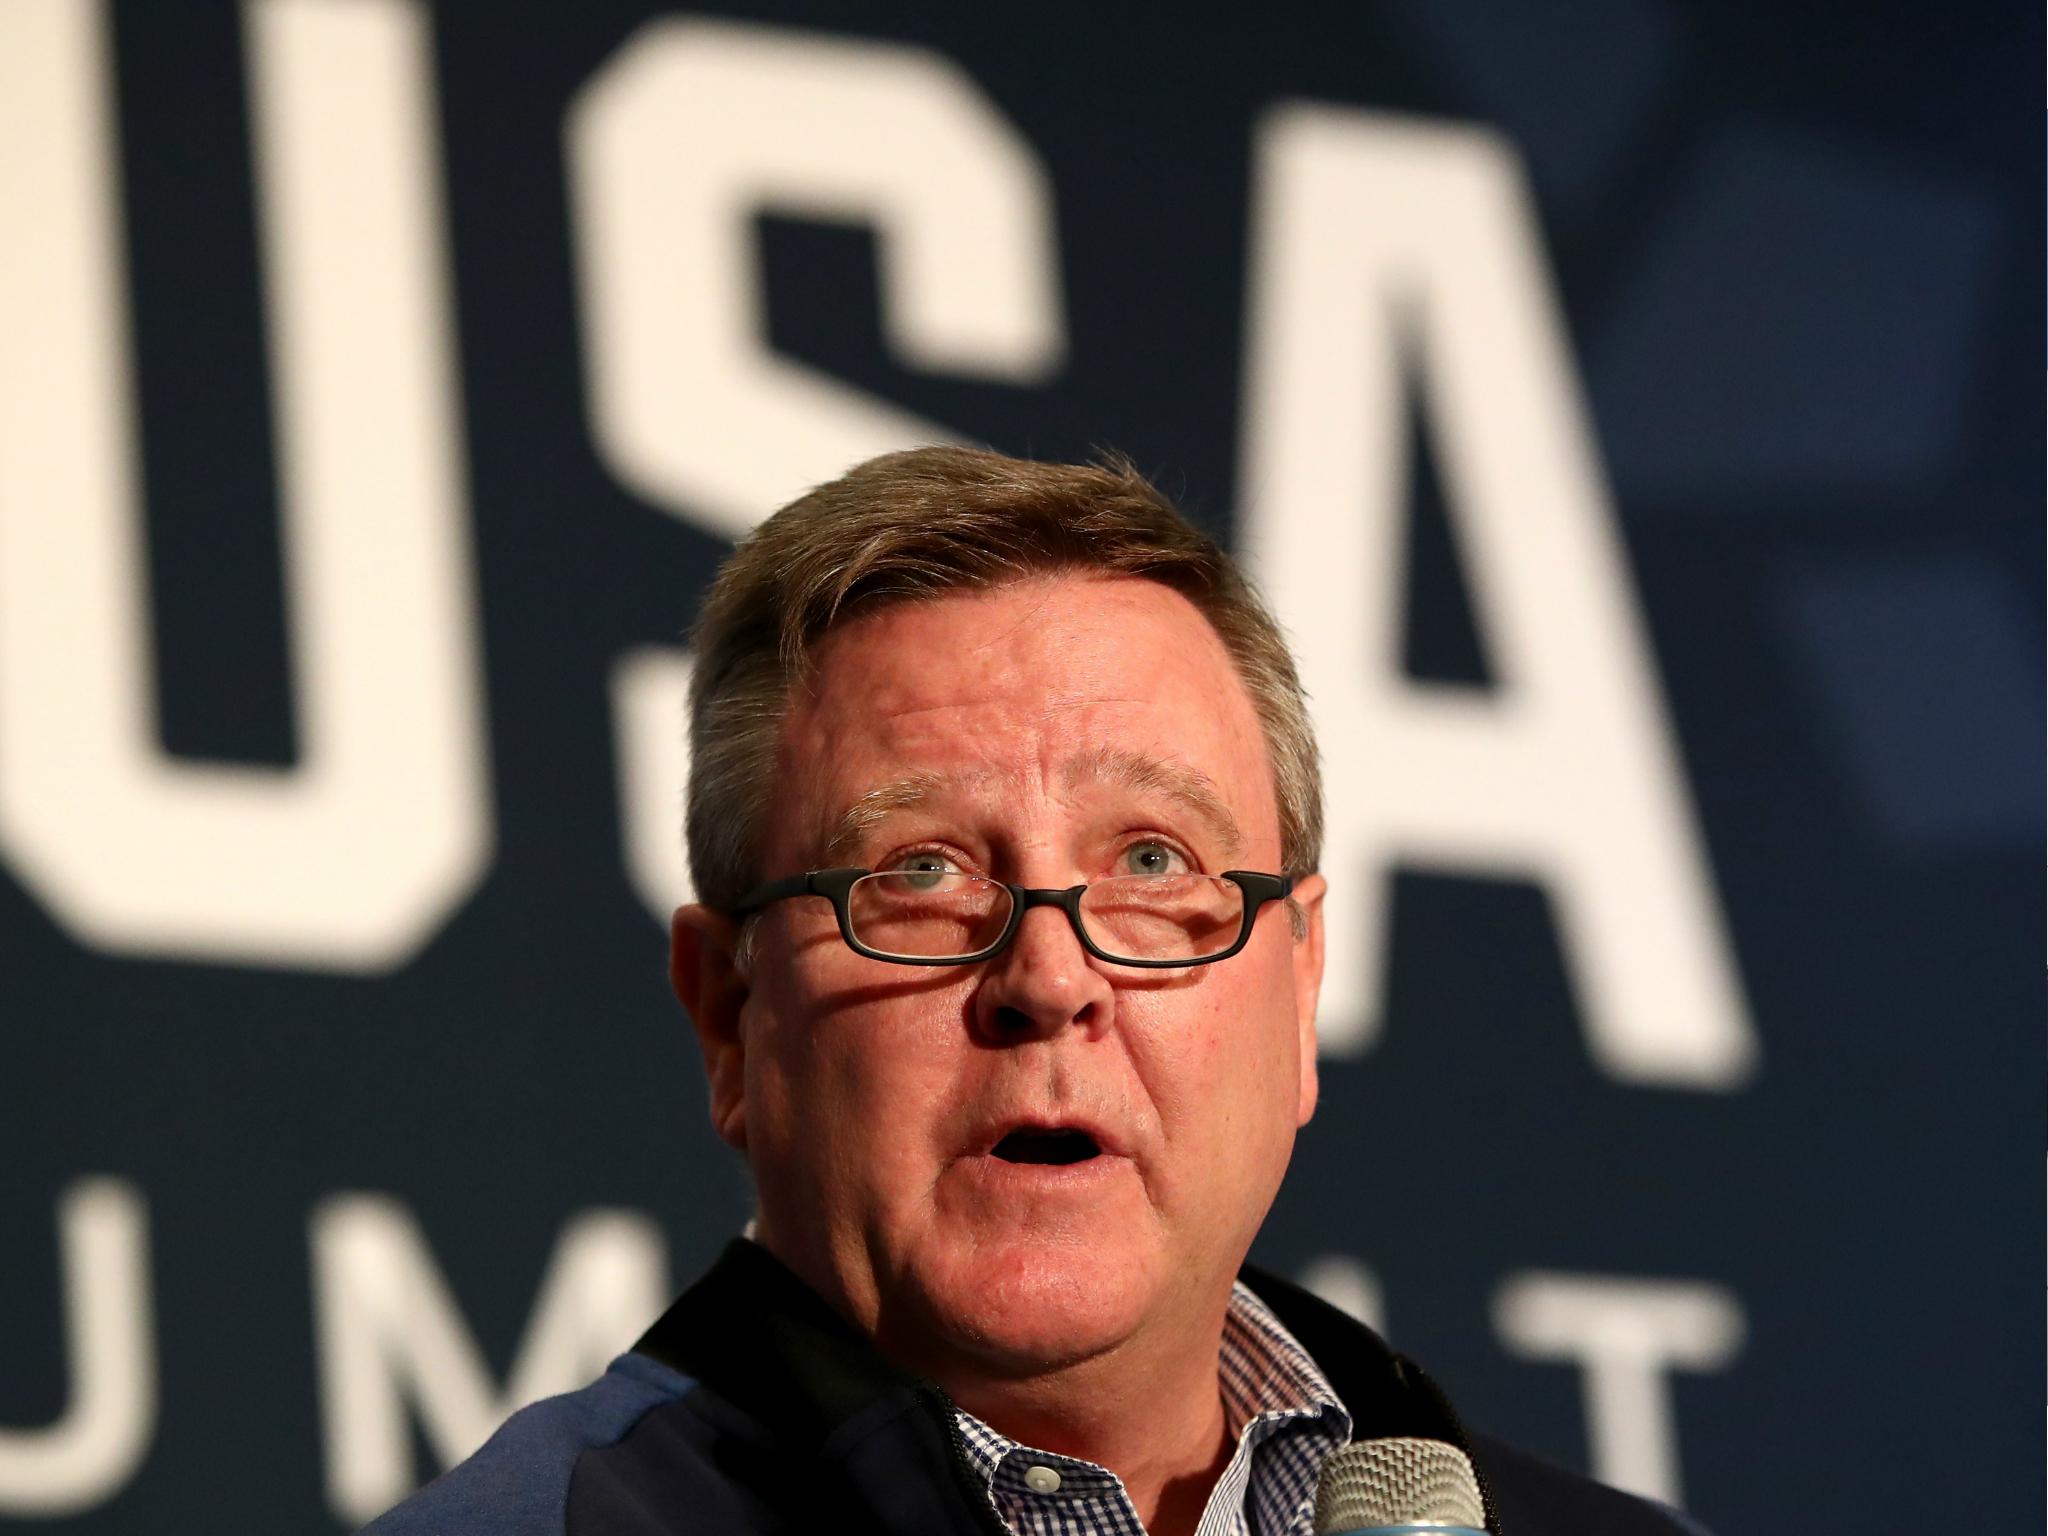 US Olympic Committee CEO Scott Blackmun has announced his resignation over his health. It also comes in the wake of the gymnastics team's sex abuse scandal.